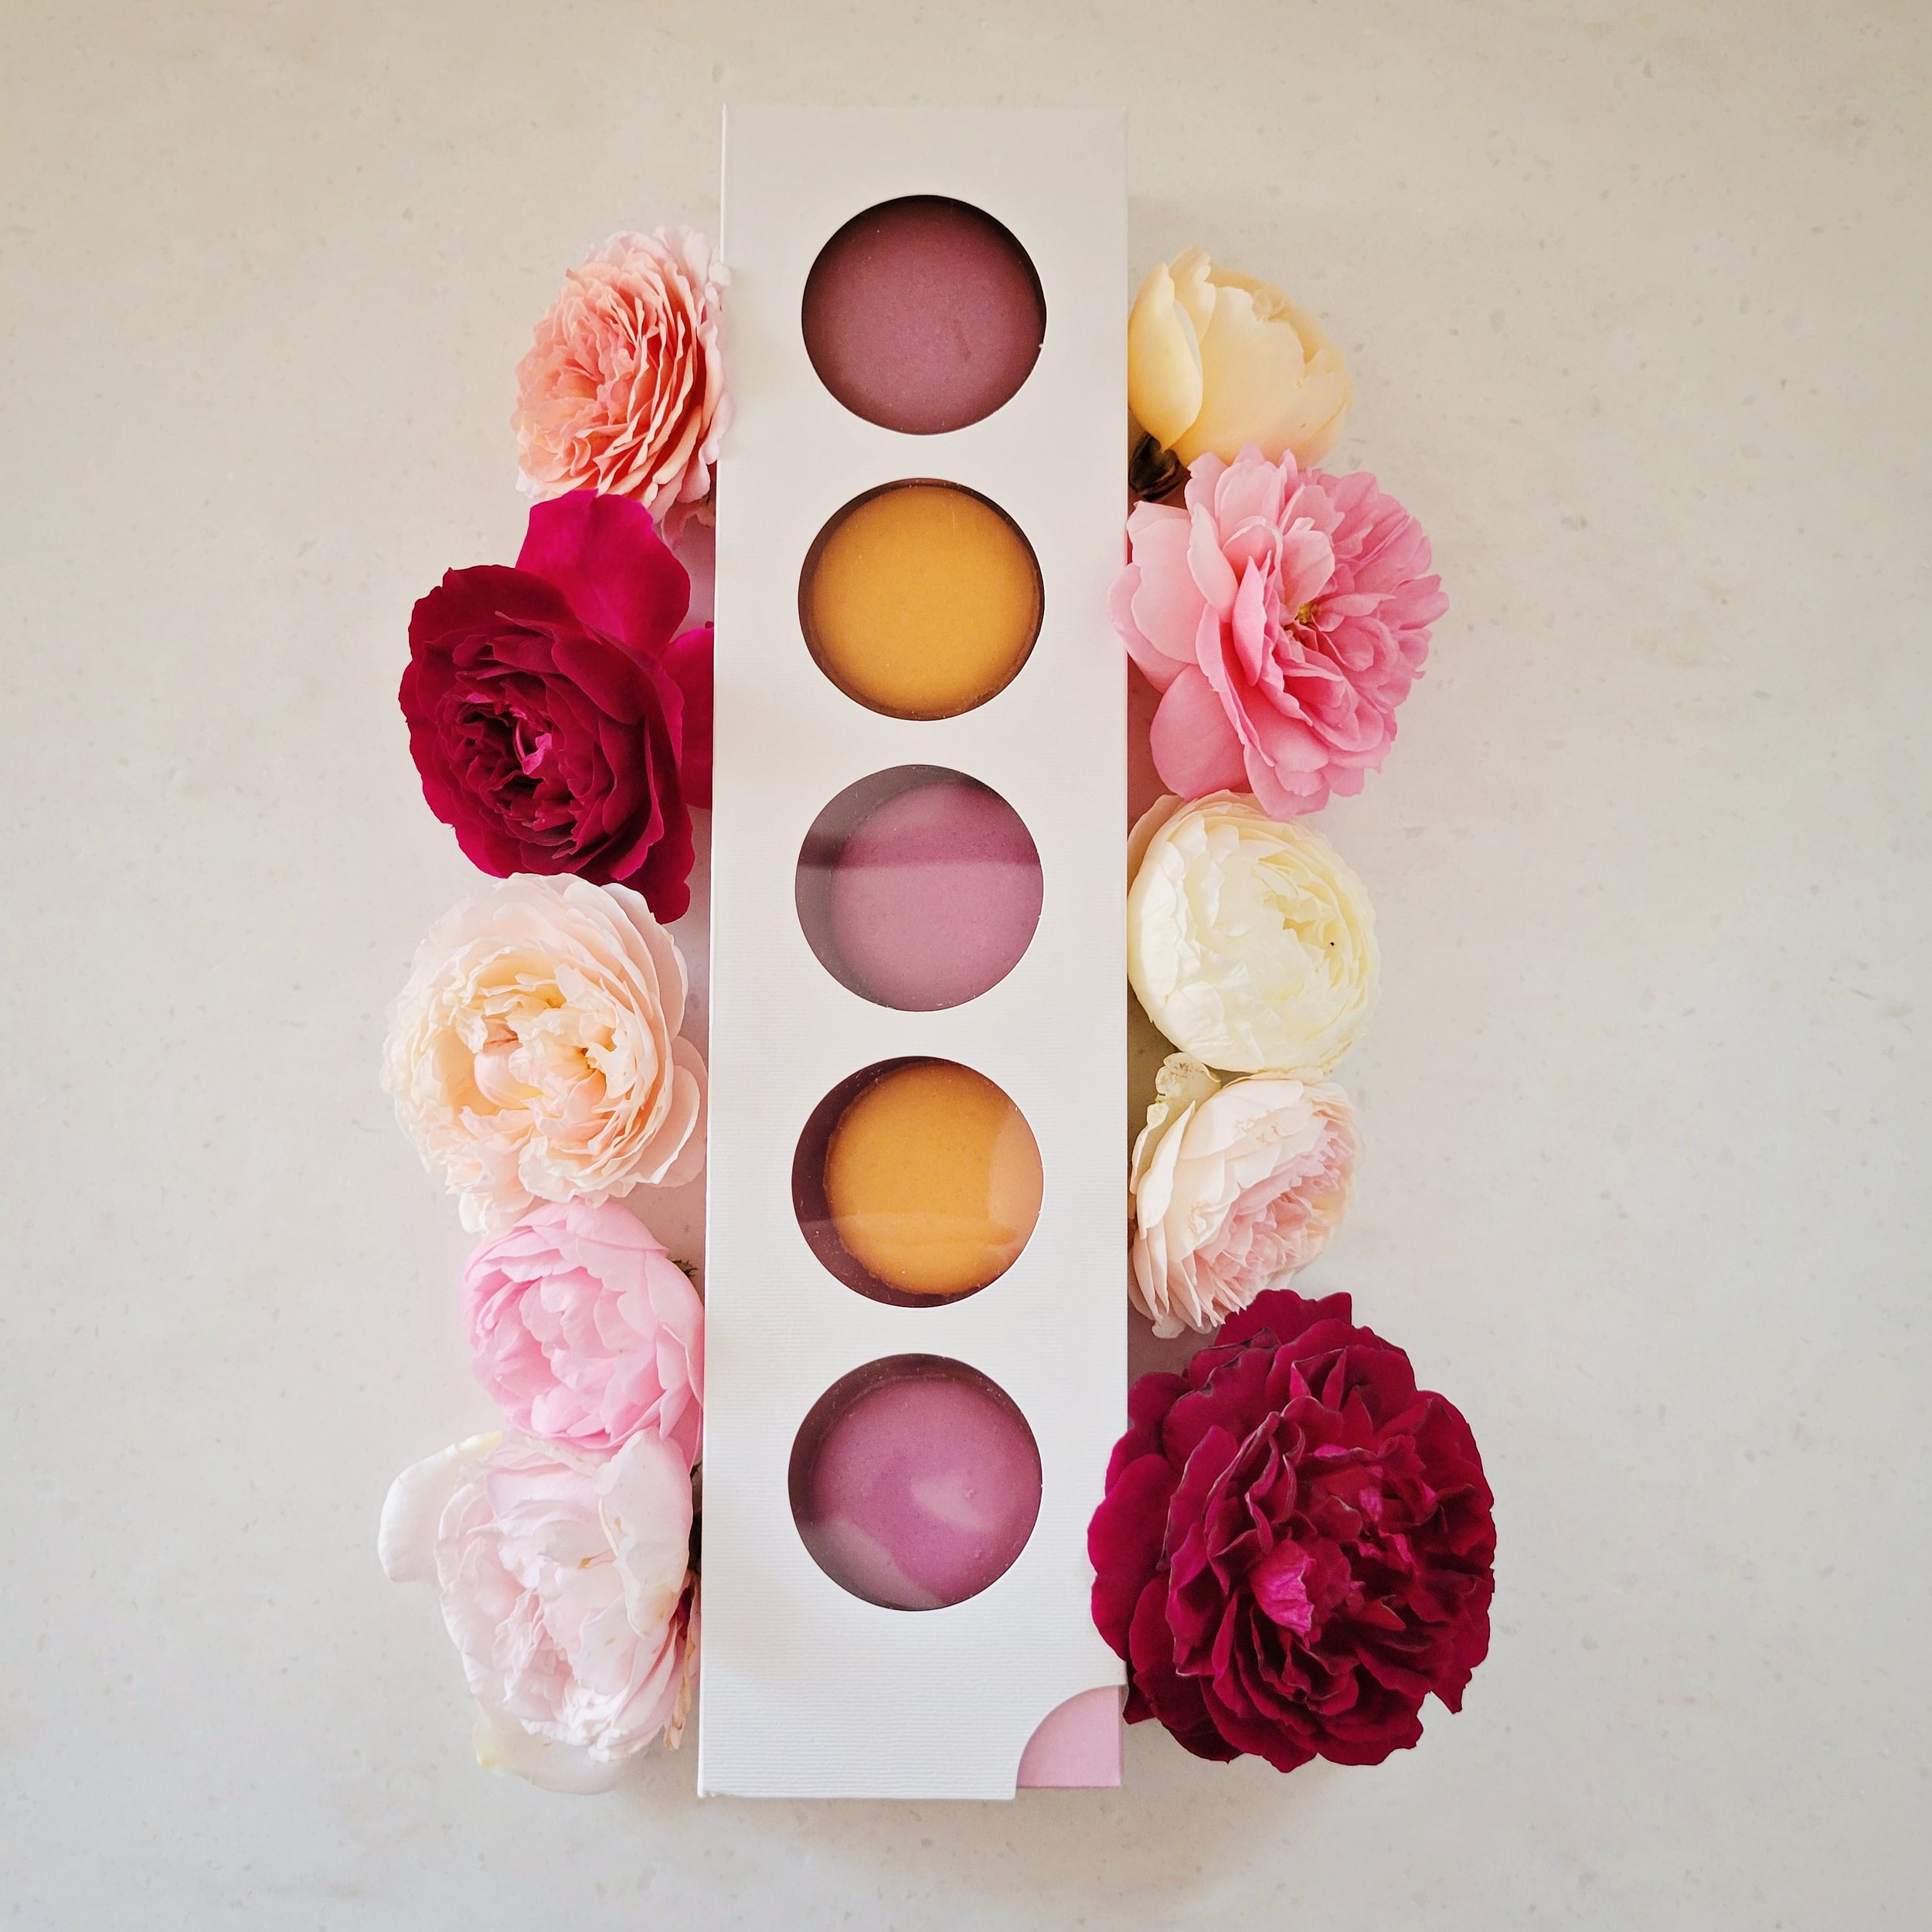 Pink and orange macarons in a decorative box surrounded by flowers